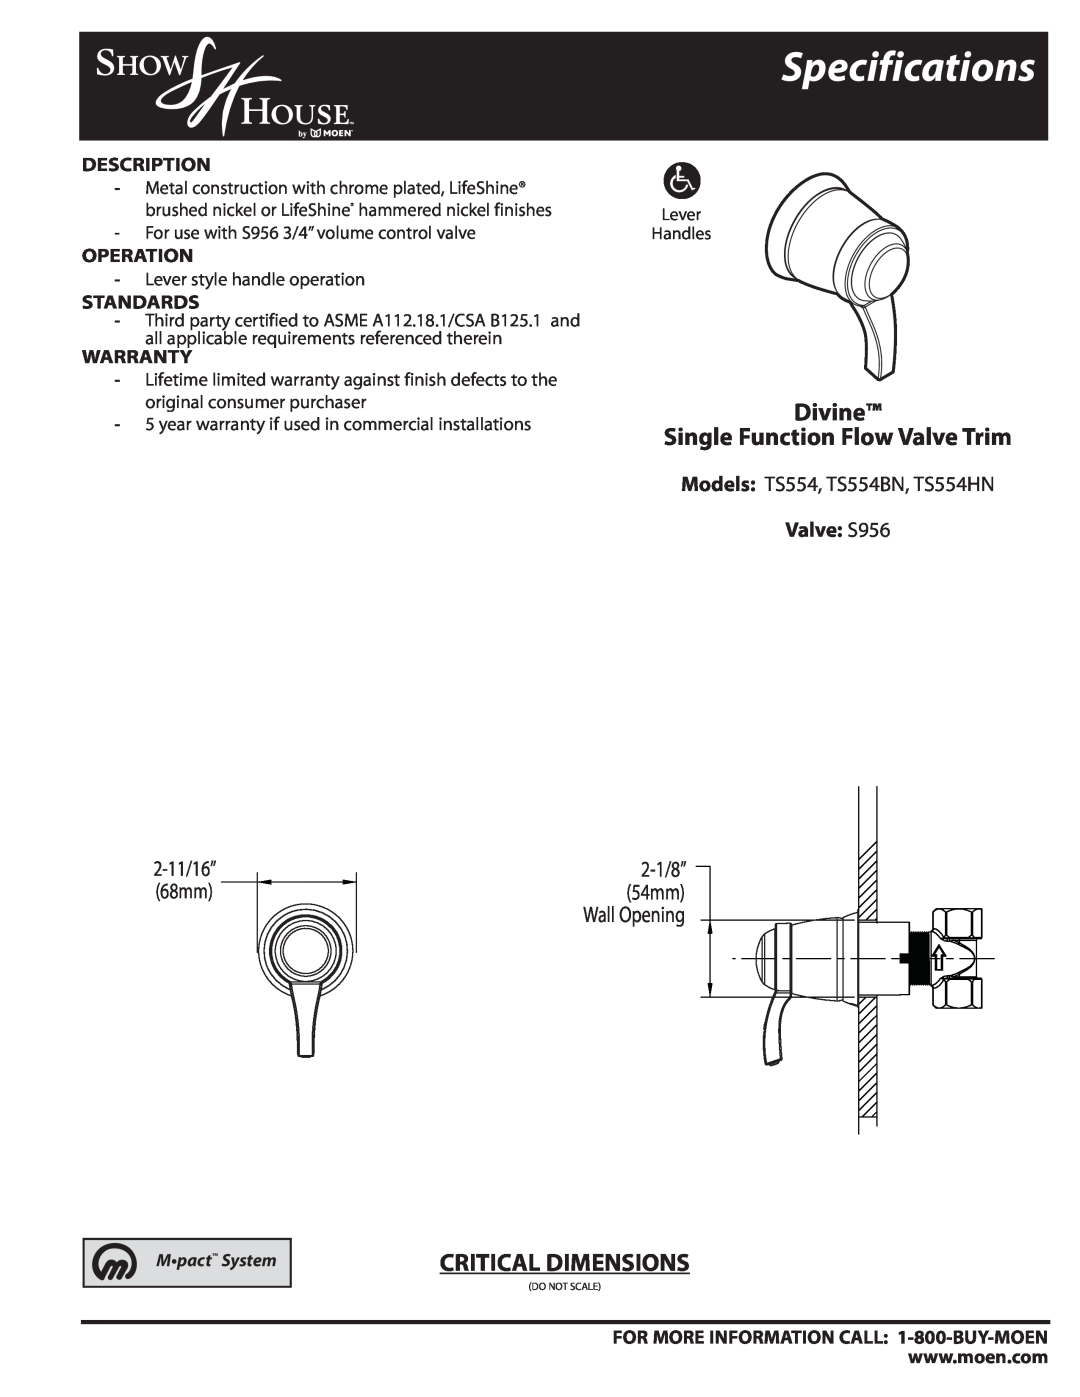 Moen TS554HN specifications Specifications, Divine Single Function Flow Valve Trim, Critical Dimensions, Wall Opening 